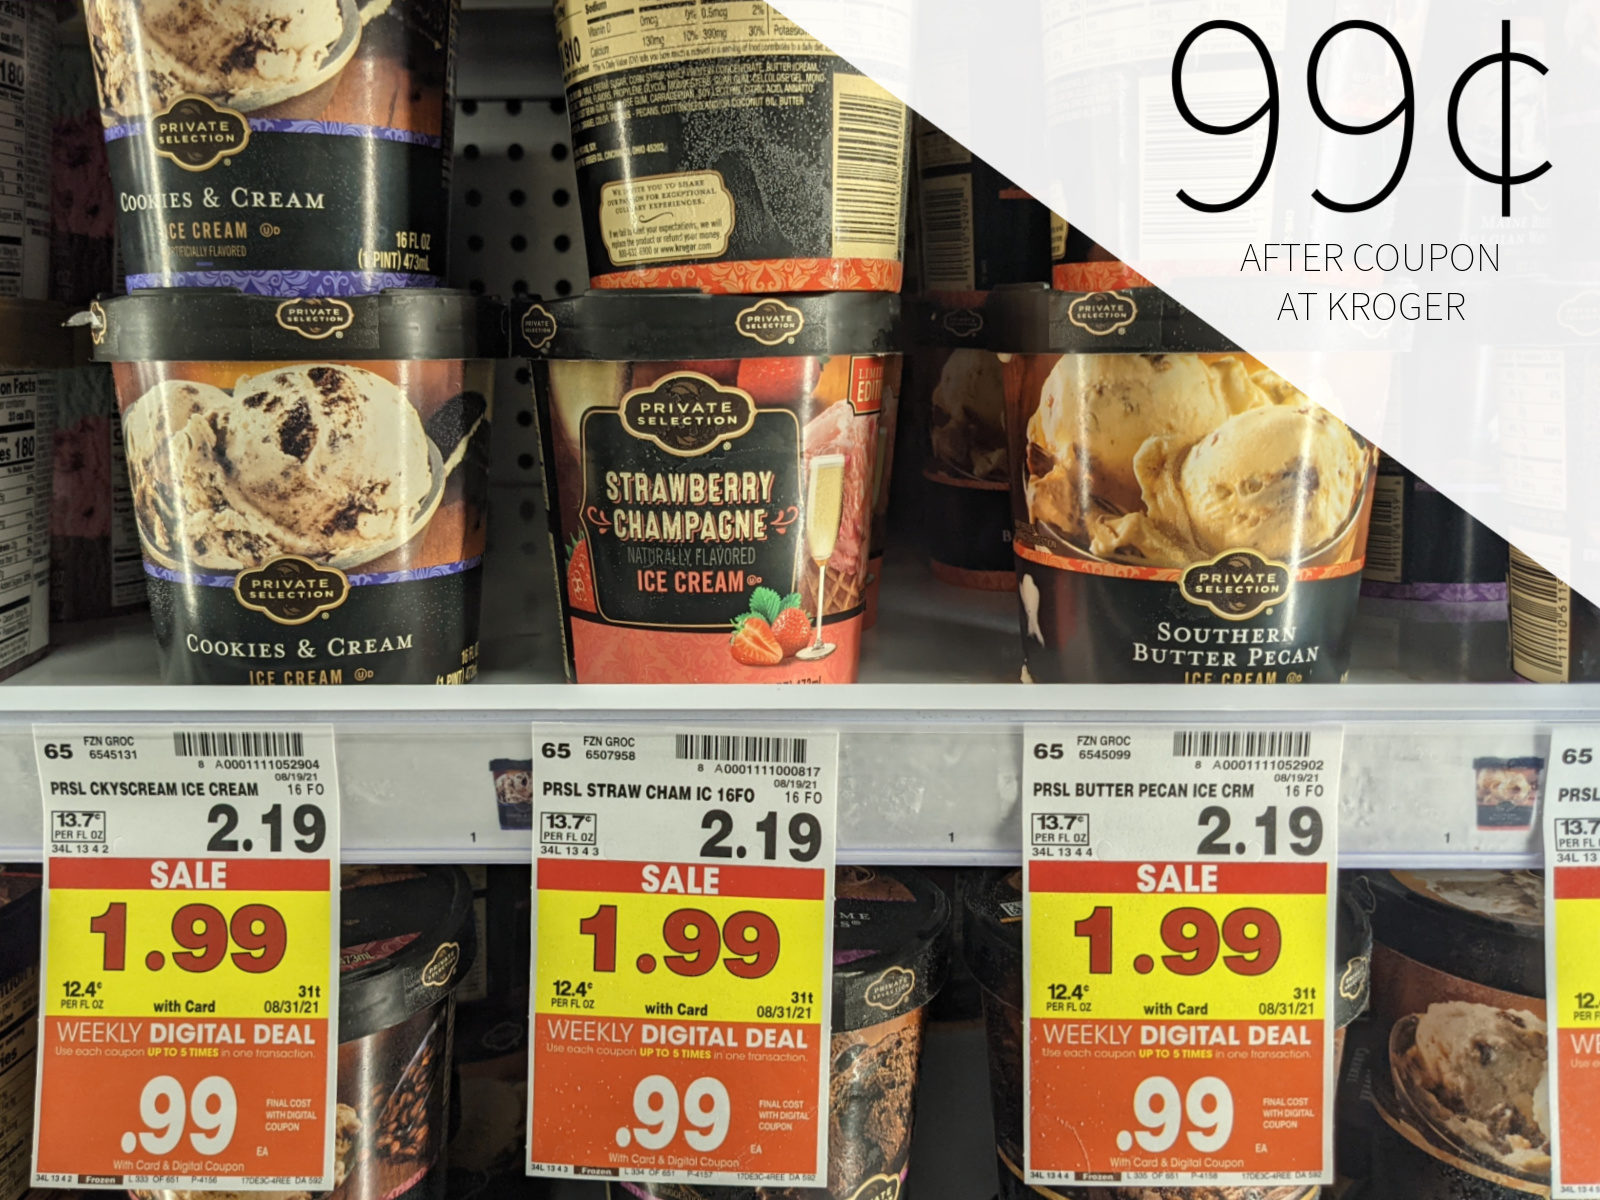 Private Selection Ice Cream Or Sorbet Only 99¢ At Kroger